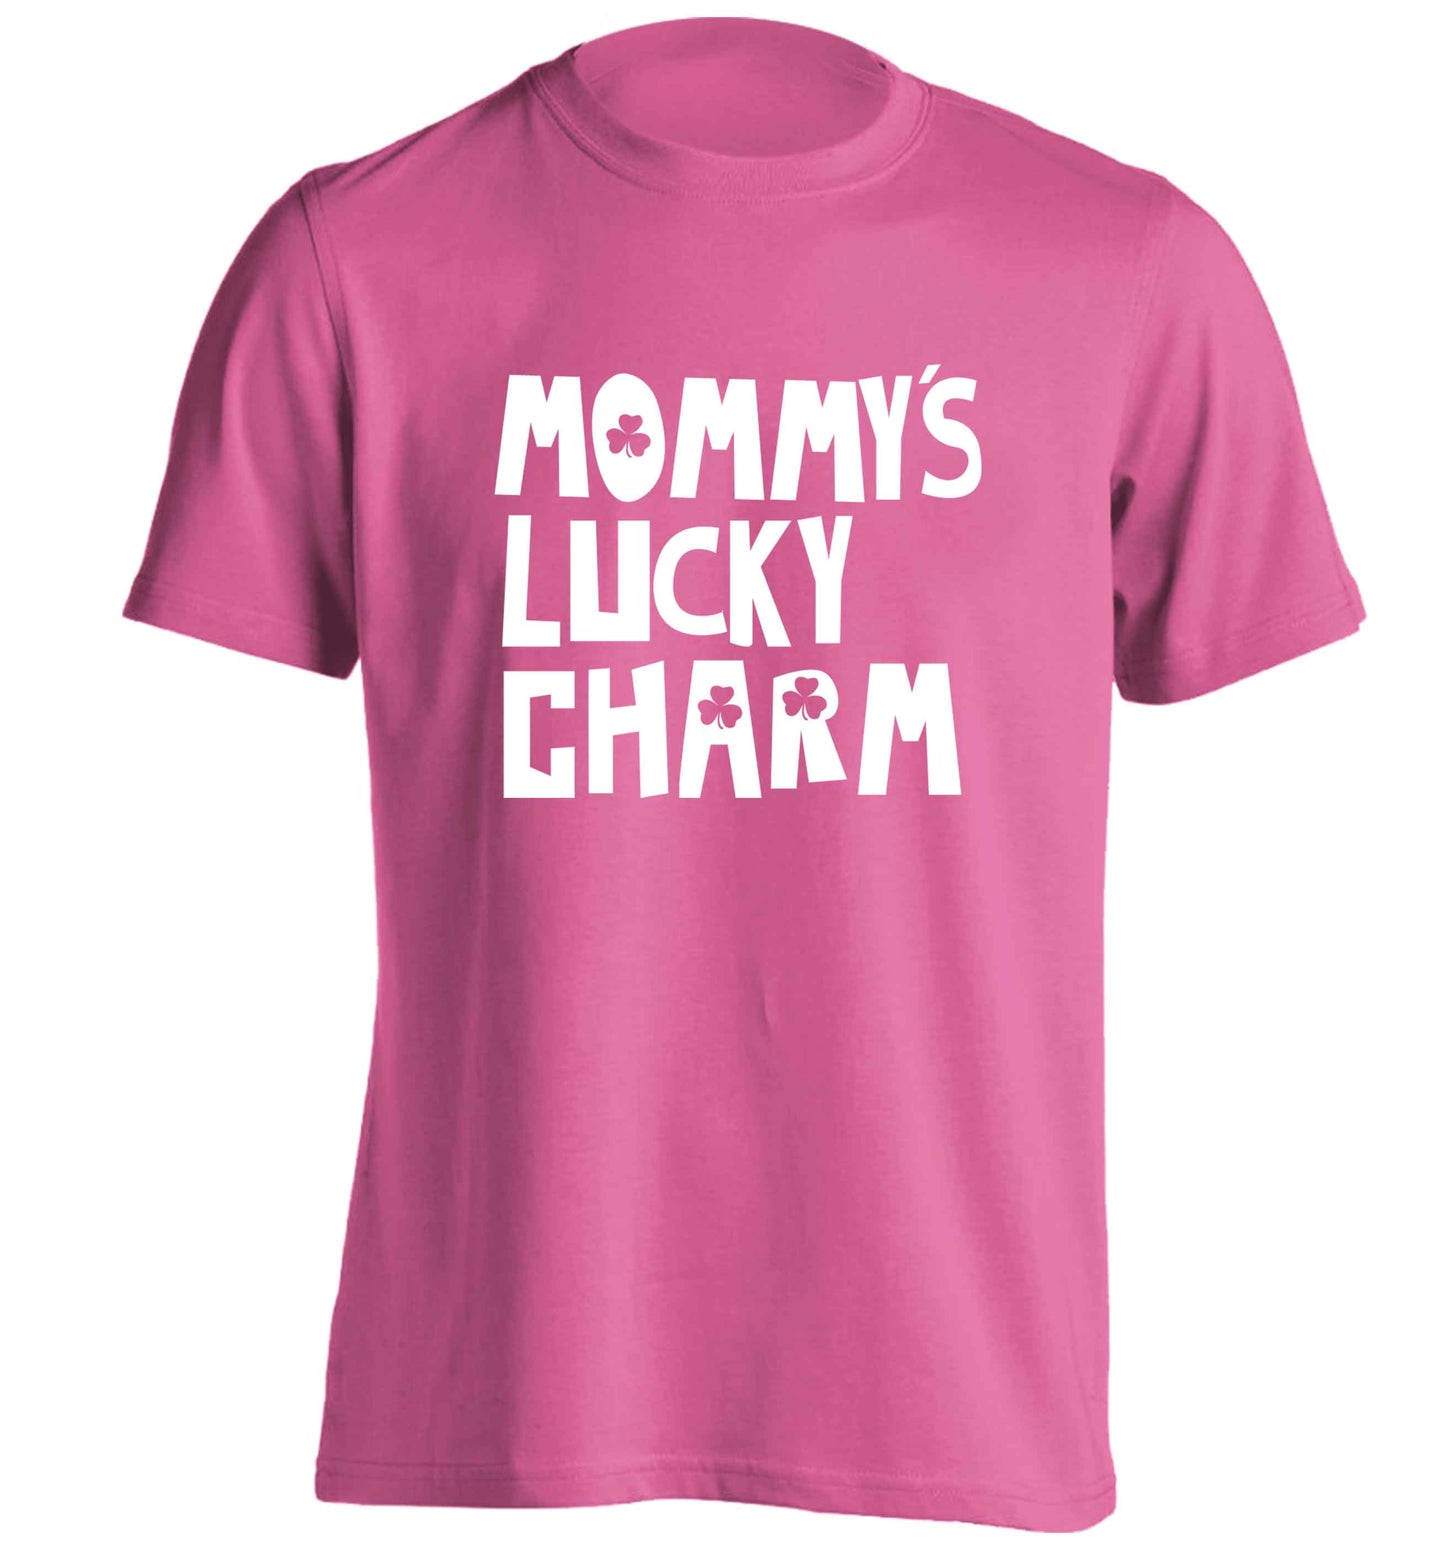 Mommy's lucky charm adults unisex pink Tshirt 2XL